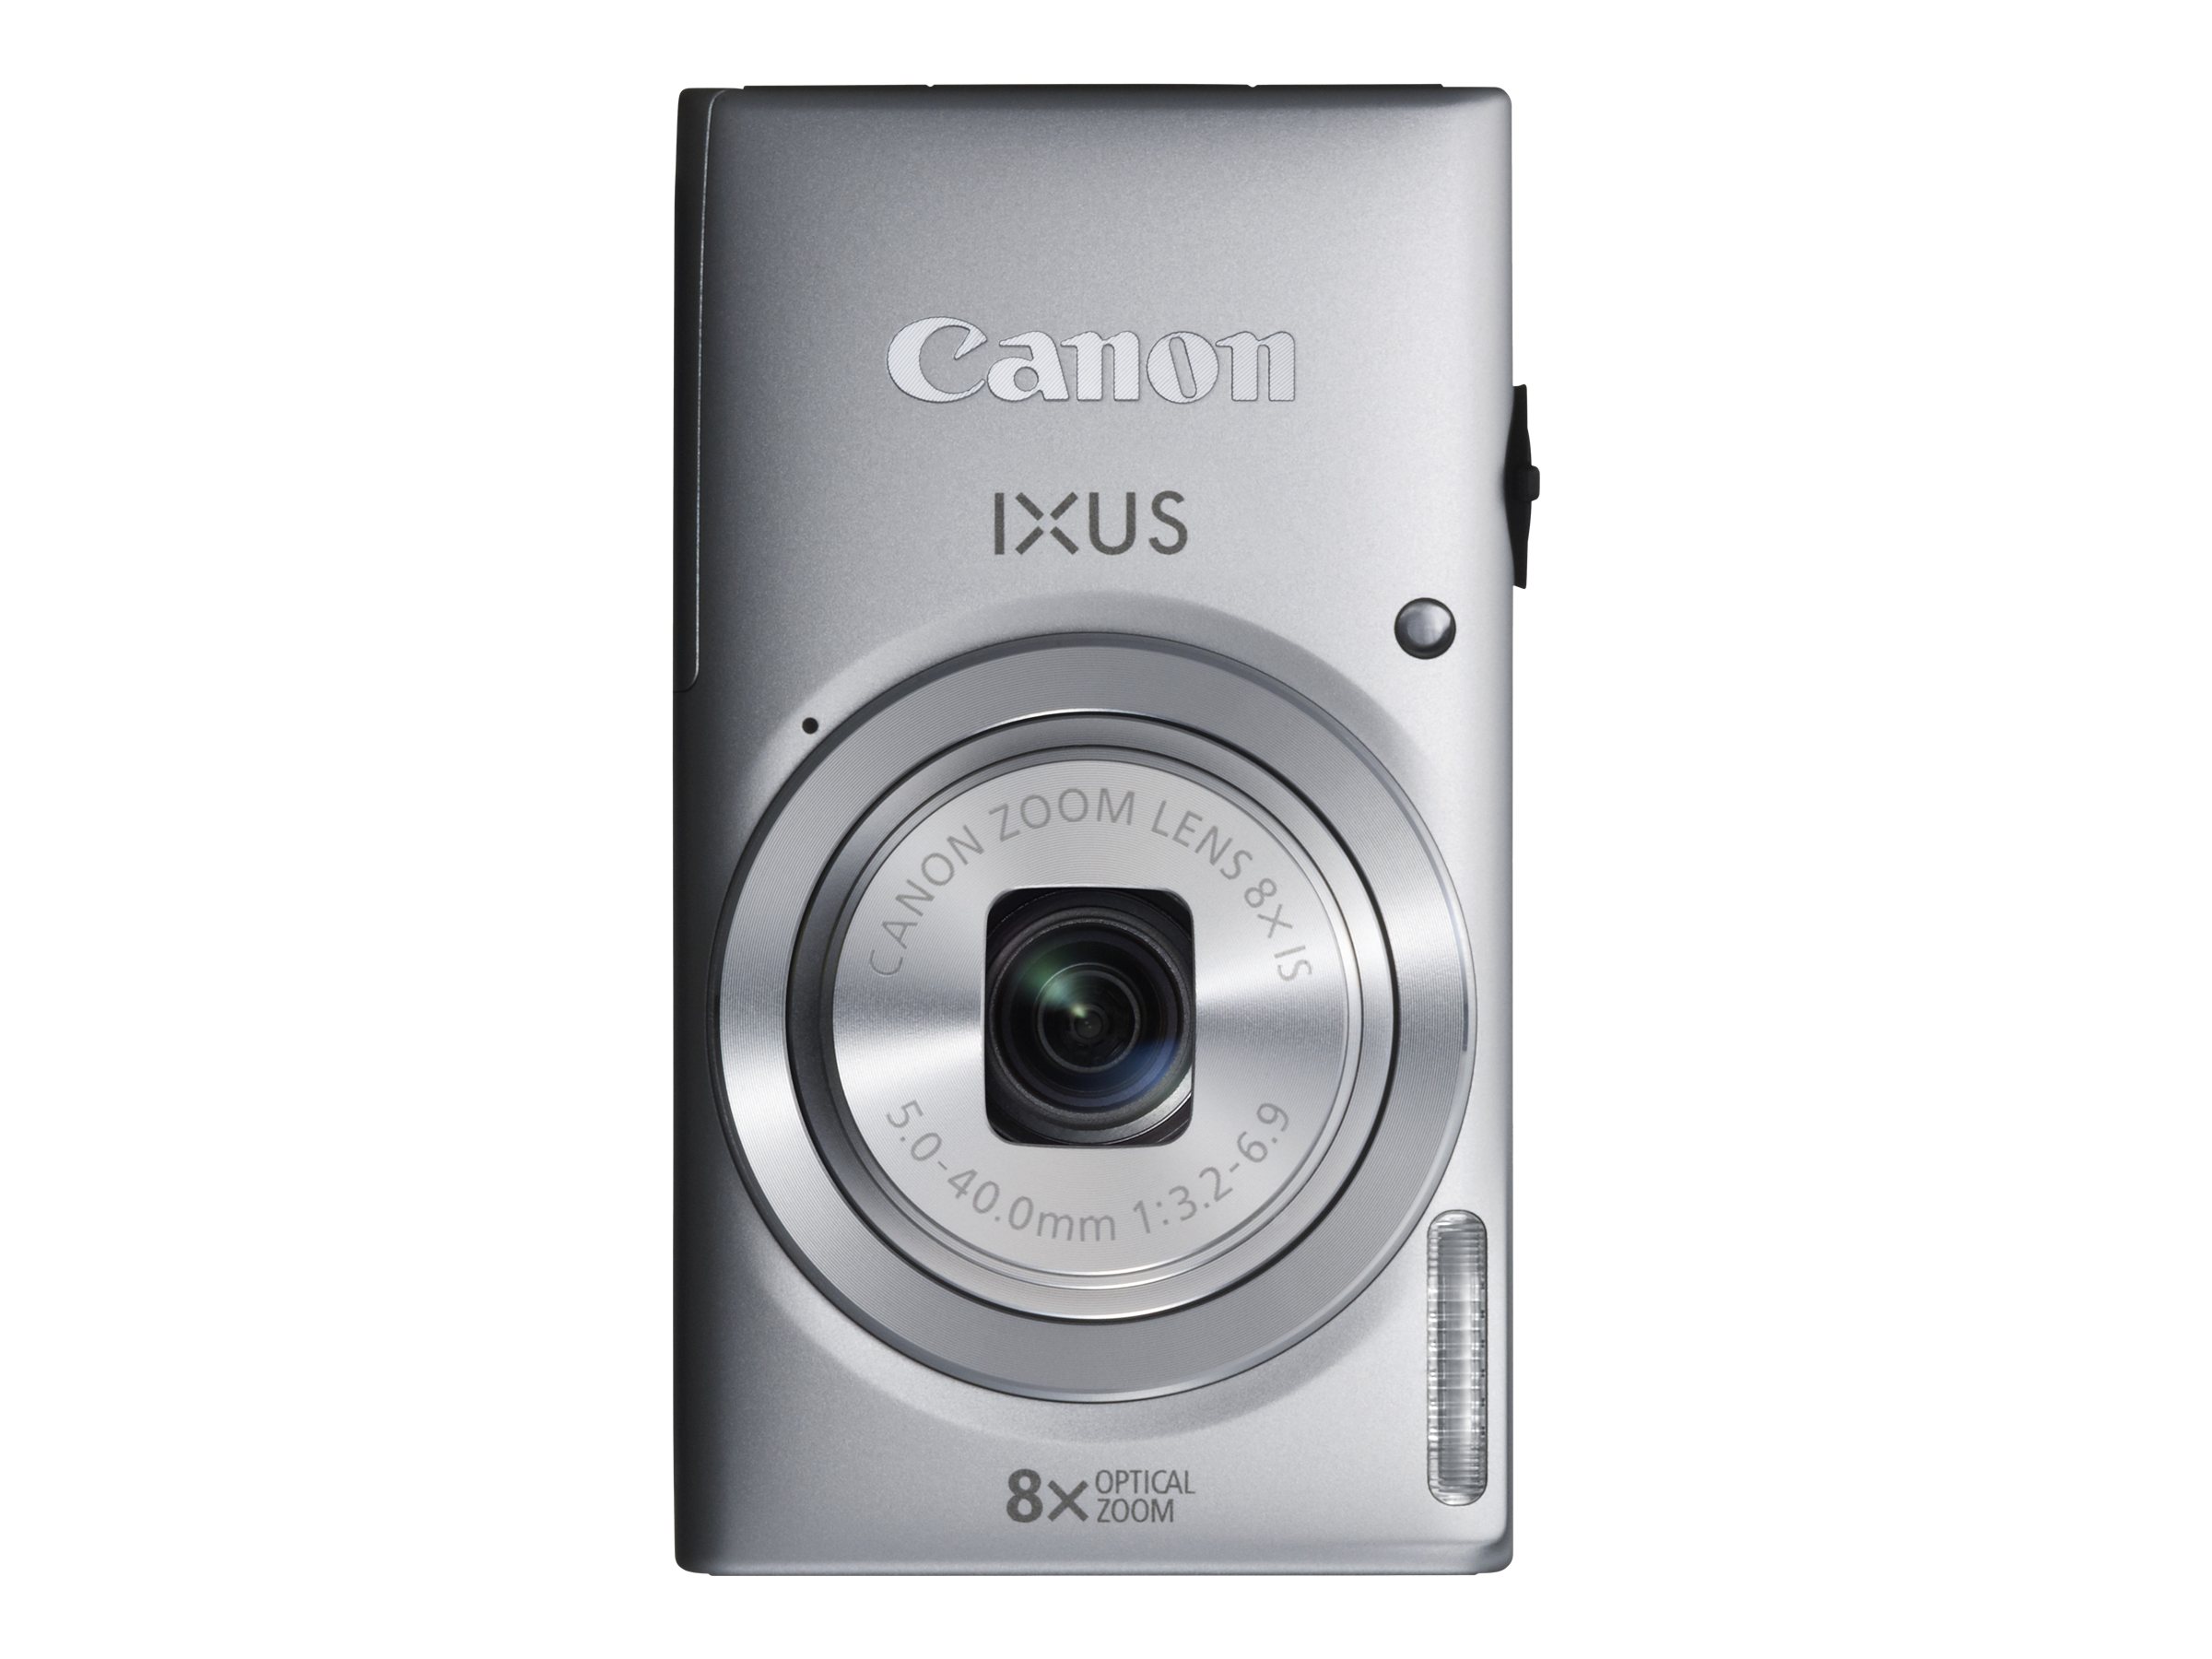 Canon unveils WiFi-toting IXUS 255 HS and PowerShot A2500 compacts